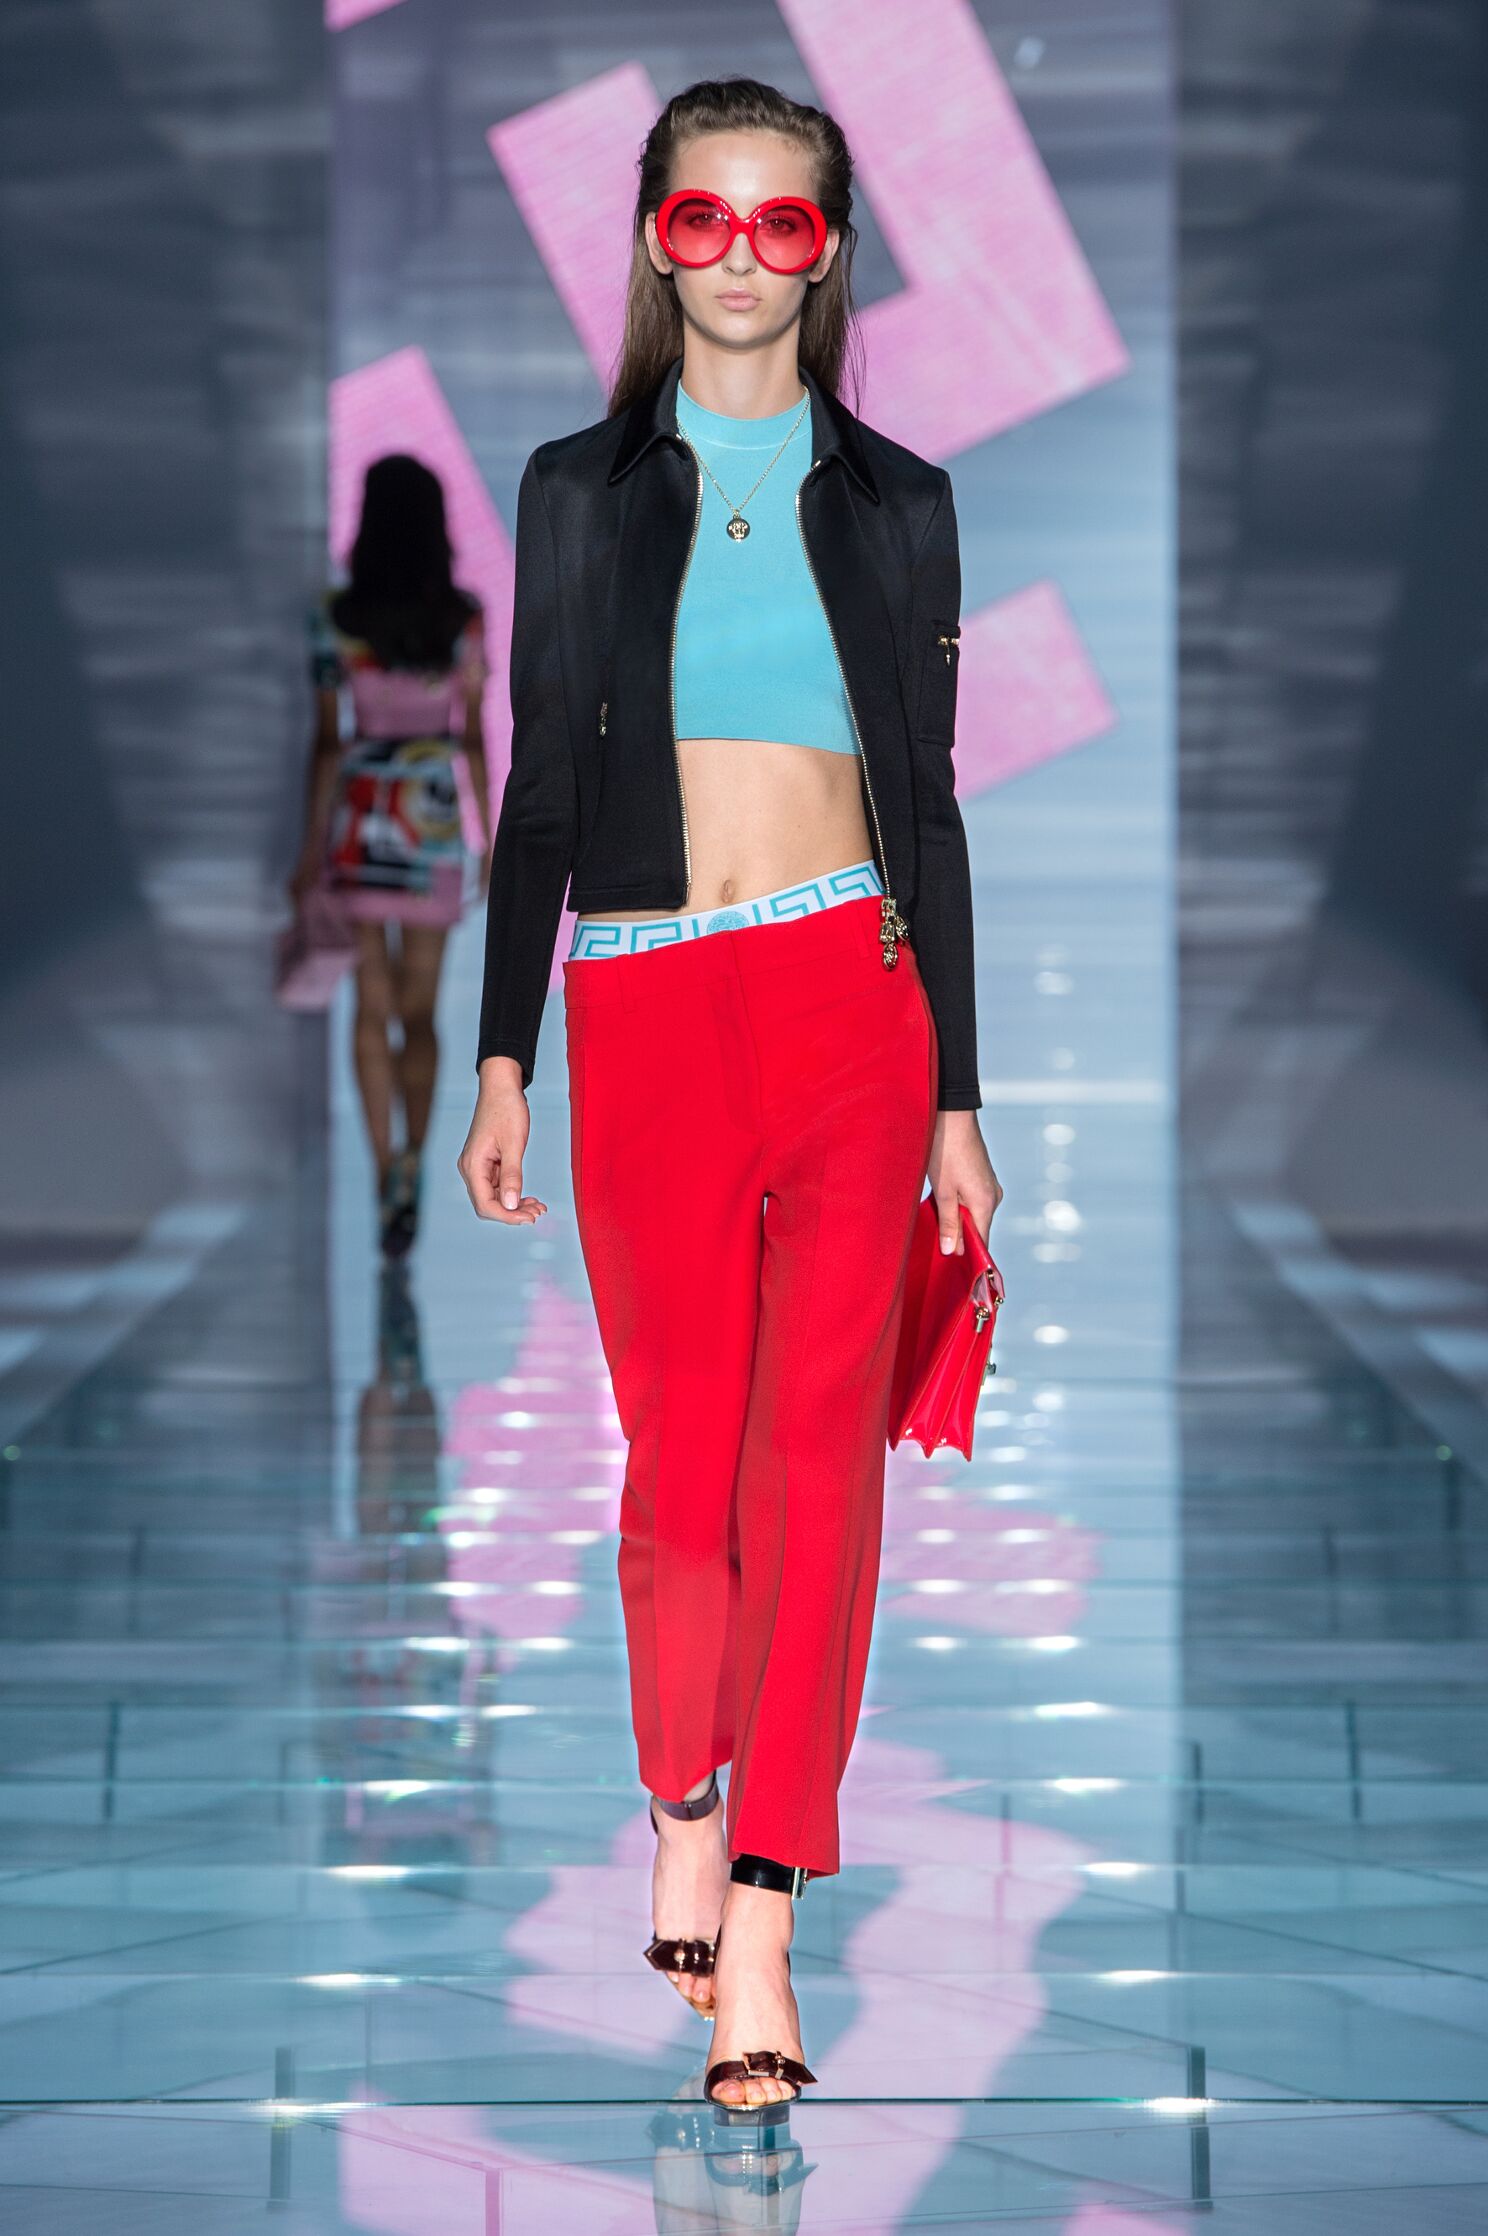 VERSACE SPRING SUMMER 2015 WOMEN’S COLLECTION | The Skinny Beep